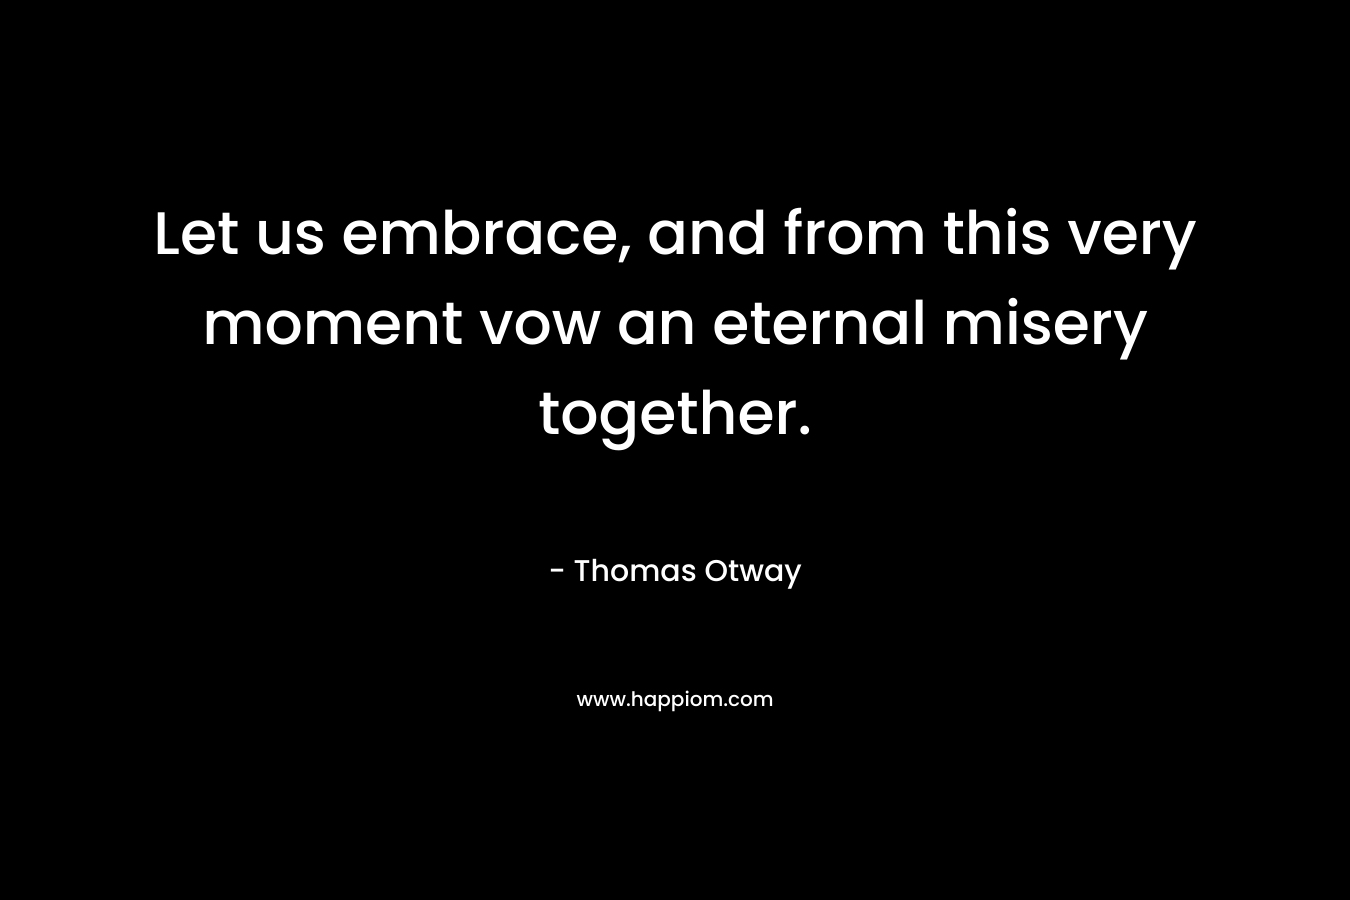 Let us embrace, and from this very moment vow an eternal misery together. – Thomas Otway